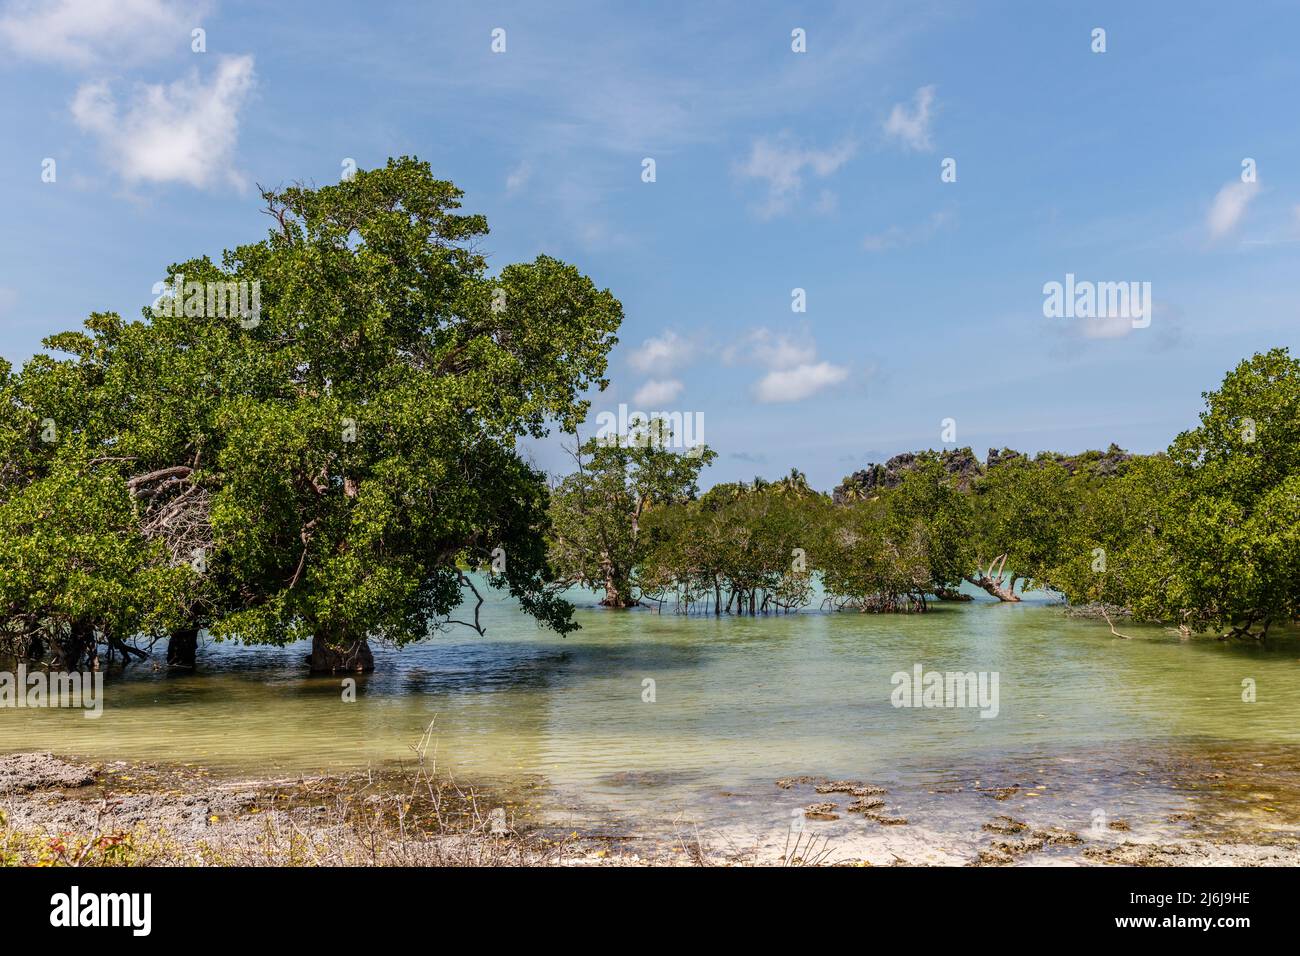 Mangrove forest in Rote Island, East Nusa Tenggara province, Indonesia Stock Photo